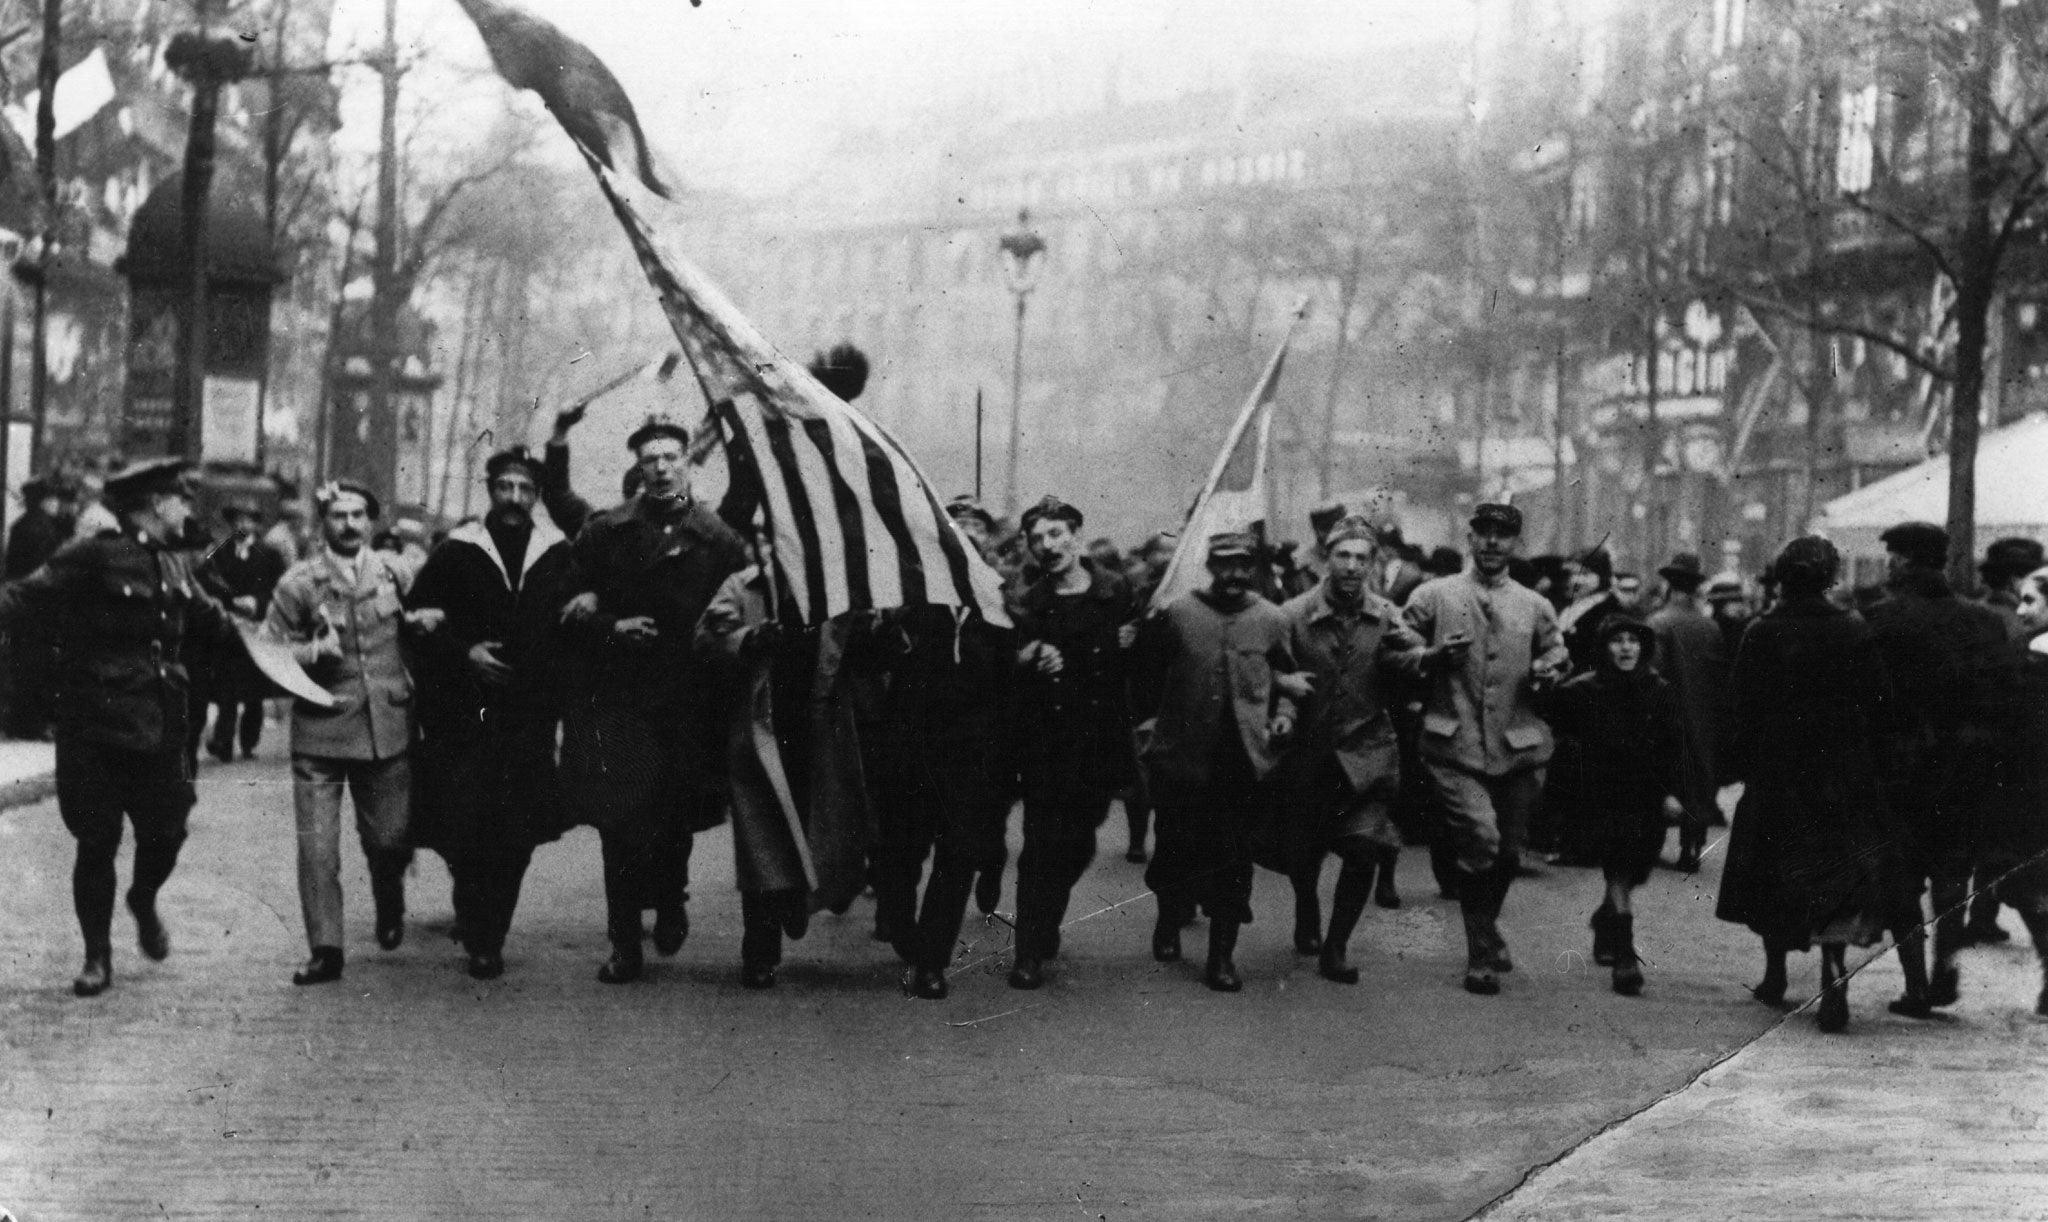 Soldiers, sailors and civilians celebrate Armistice Day in 1918